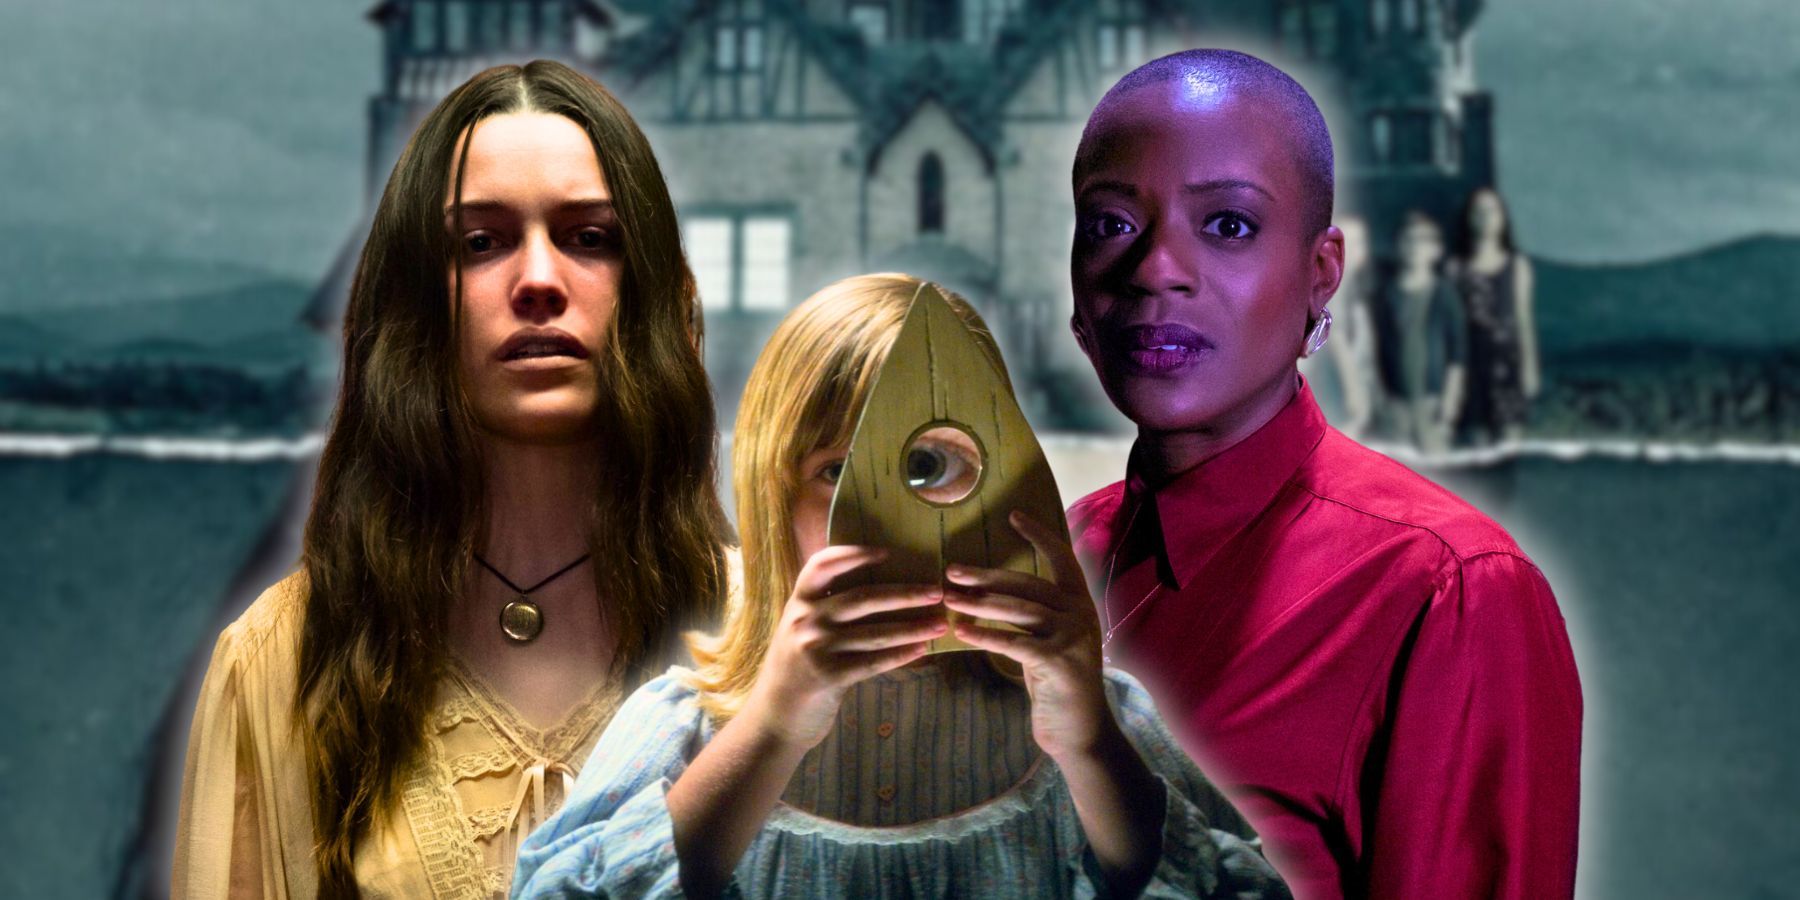 Mike Flanagan projects collage, featuring The Haunting of Hill House, Ouija: Origins, and The Haunting of Bly Manor